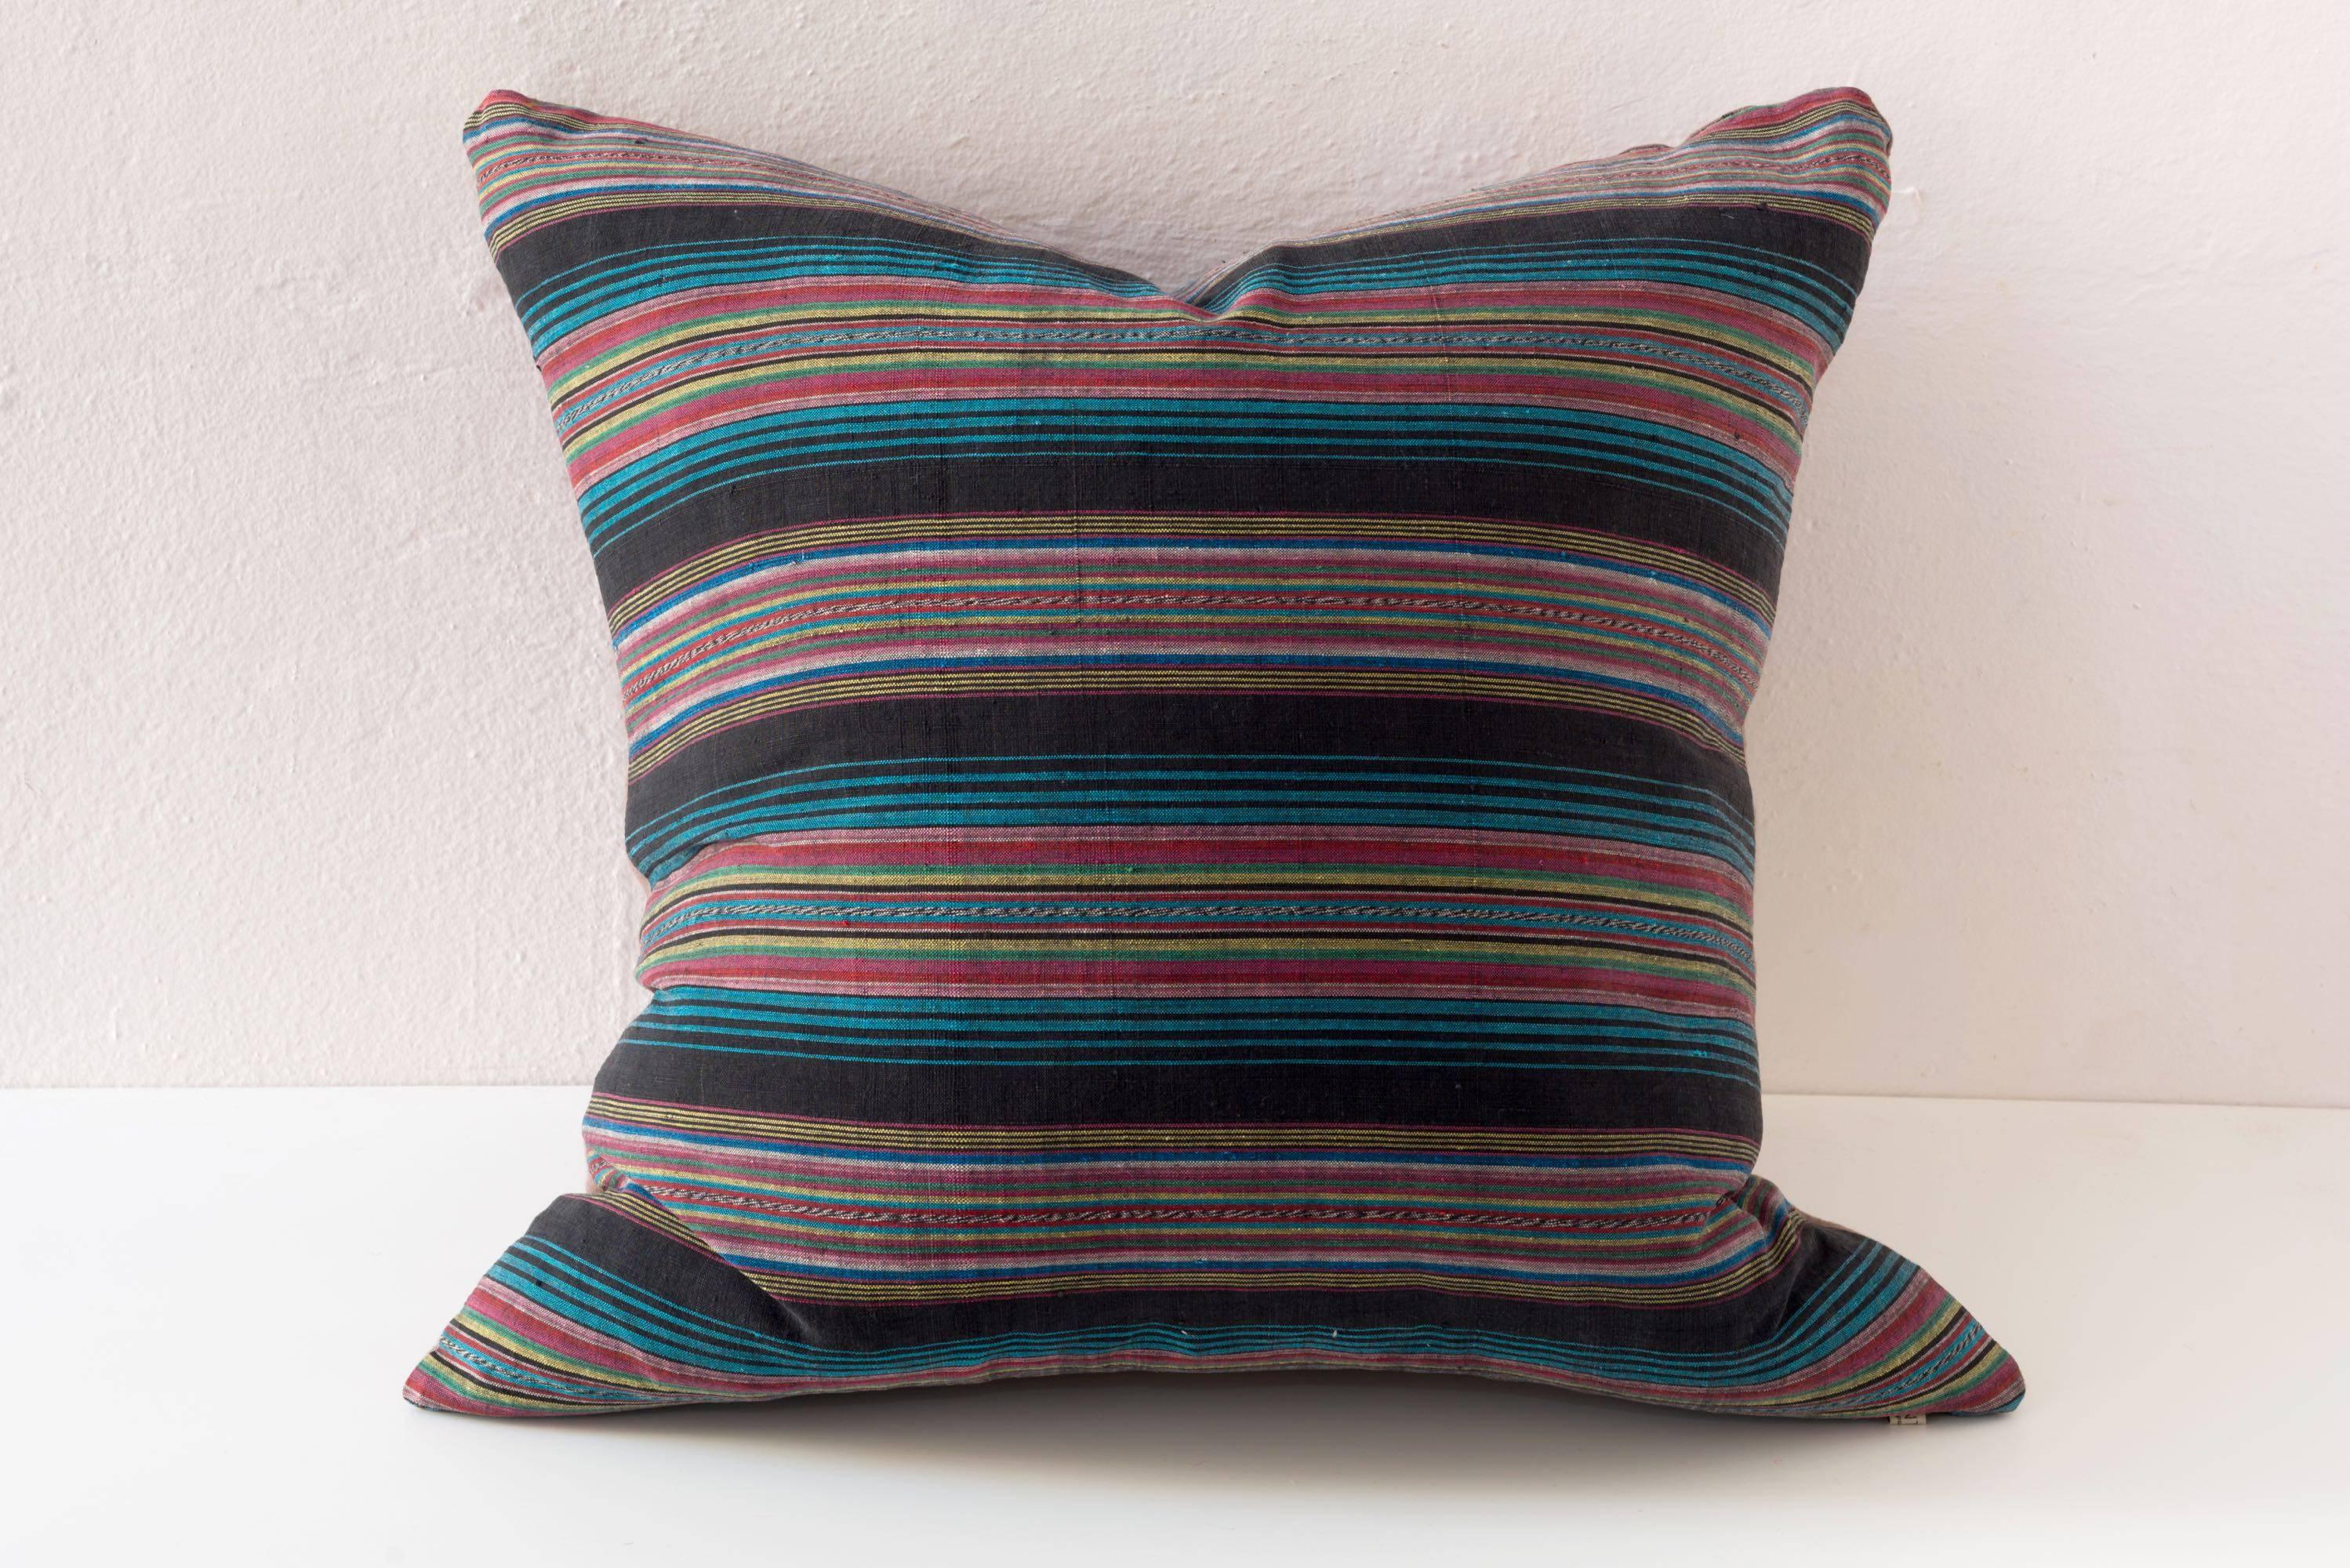 Chinese Large Vintage Cotton Stripe Pillow in Black, Turquoise, and Red For Sale